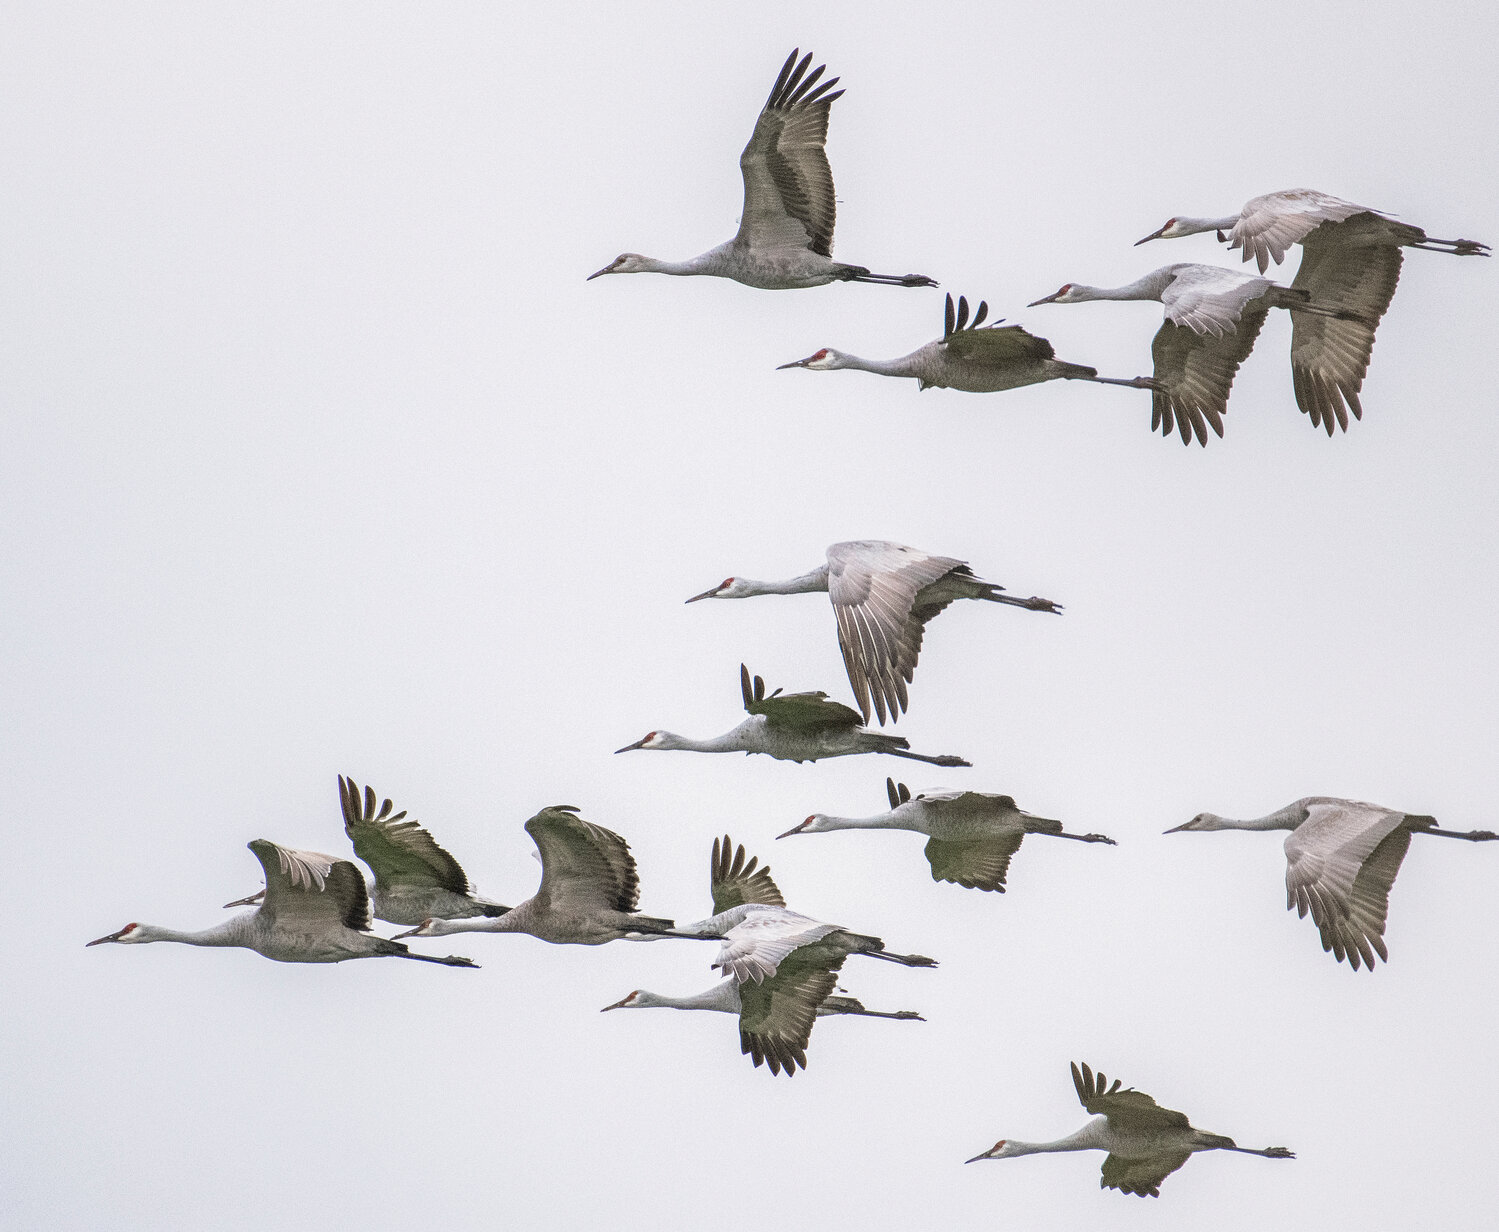 A flock of sandhill cranes, which, at times, has had more than 50 birds, spends its winter flying between fields in the Chehalis River valley near Elma. The birds are pictured here on Wednesday, Nov. 22.